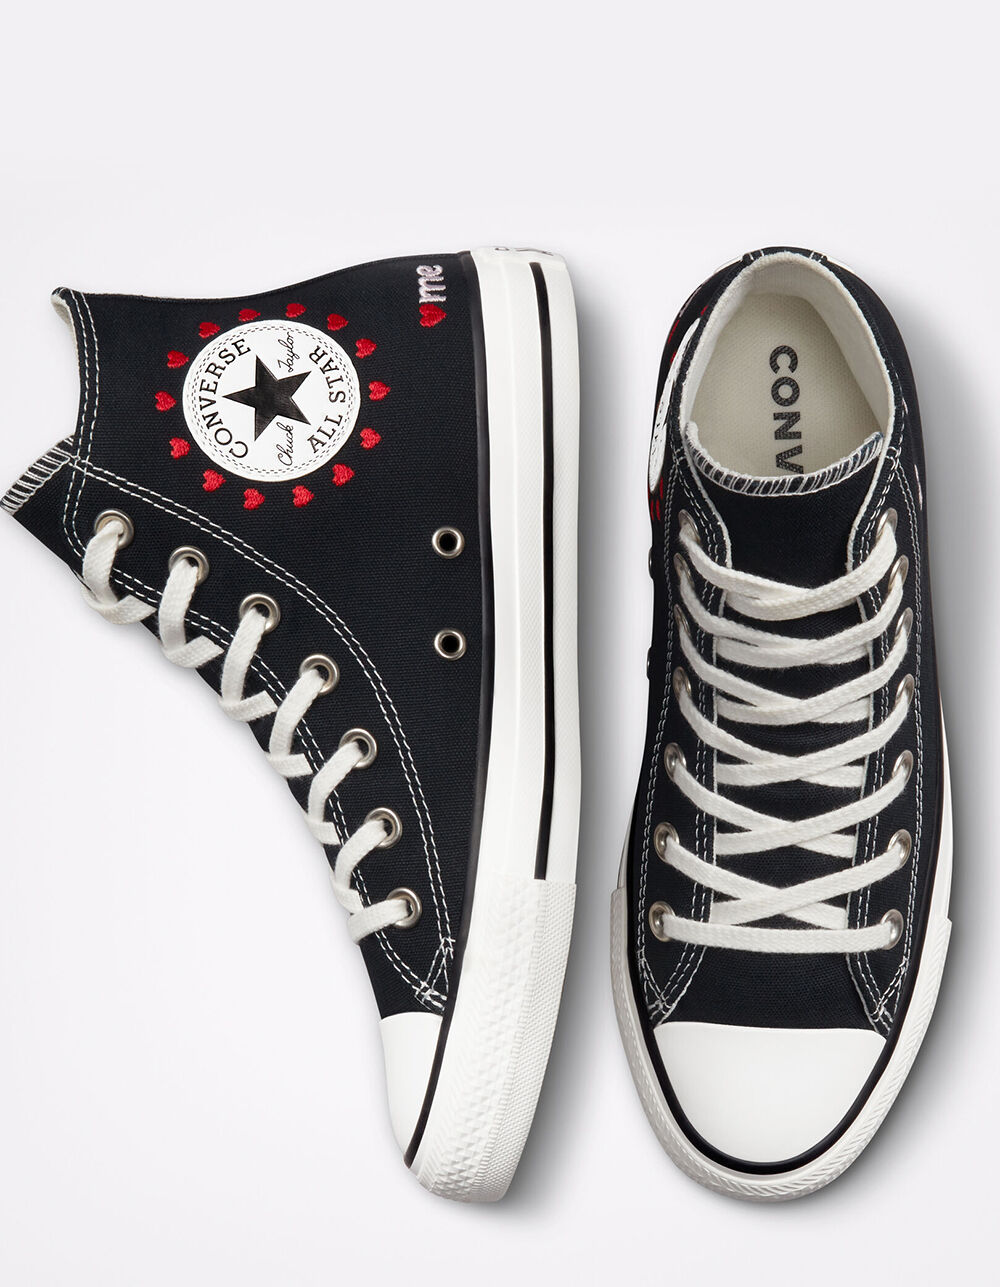 Converse Chuck Taylor All Star Heart Embroidery Sneakers